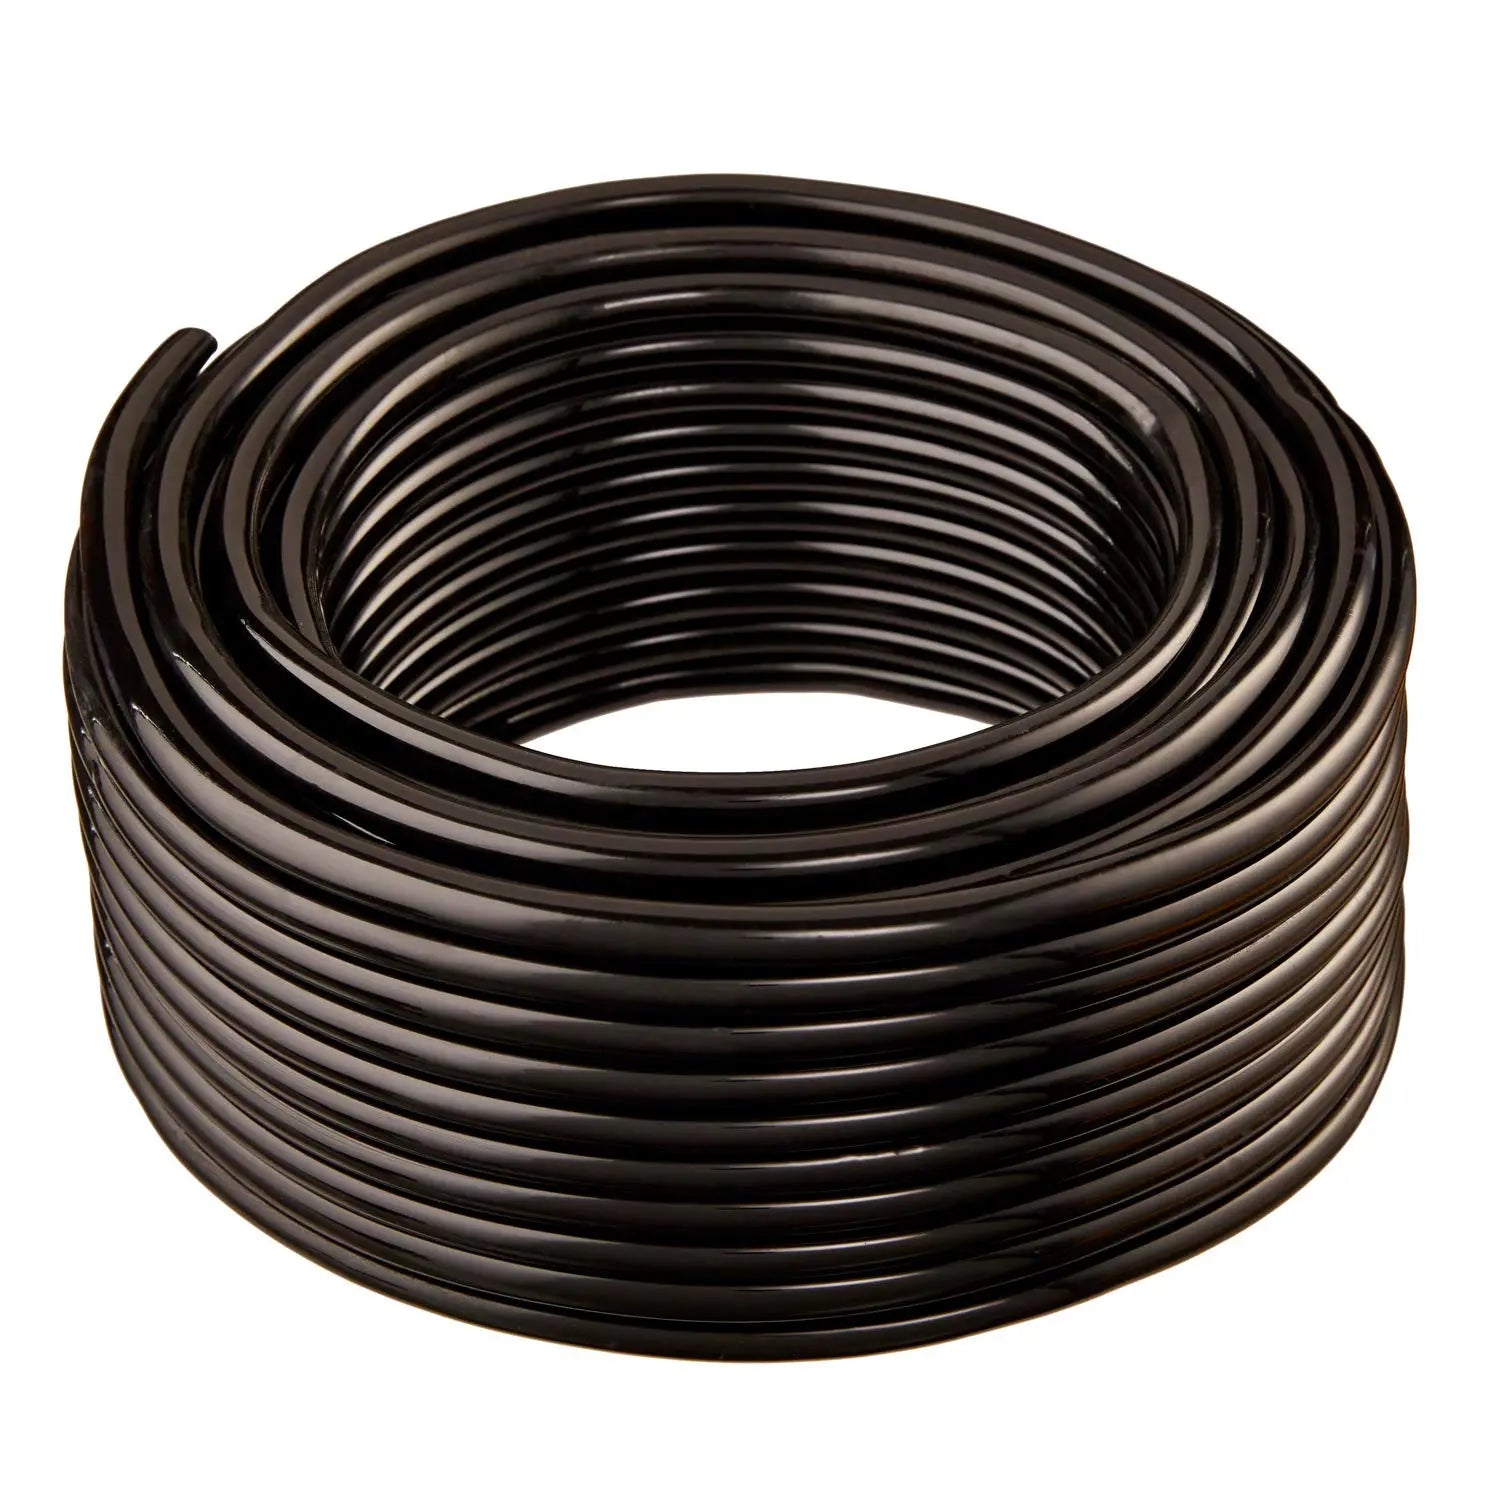 Durable Flexible Vinyl Tubing And Safe For Fish and Plants